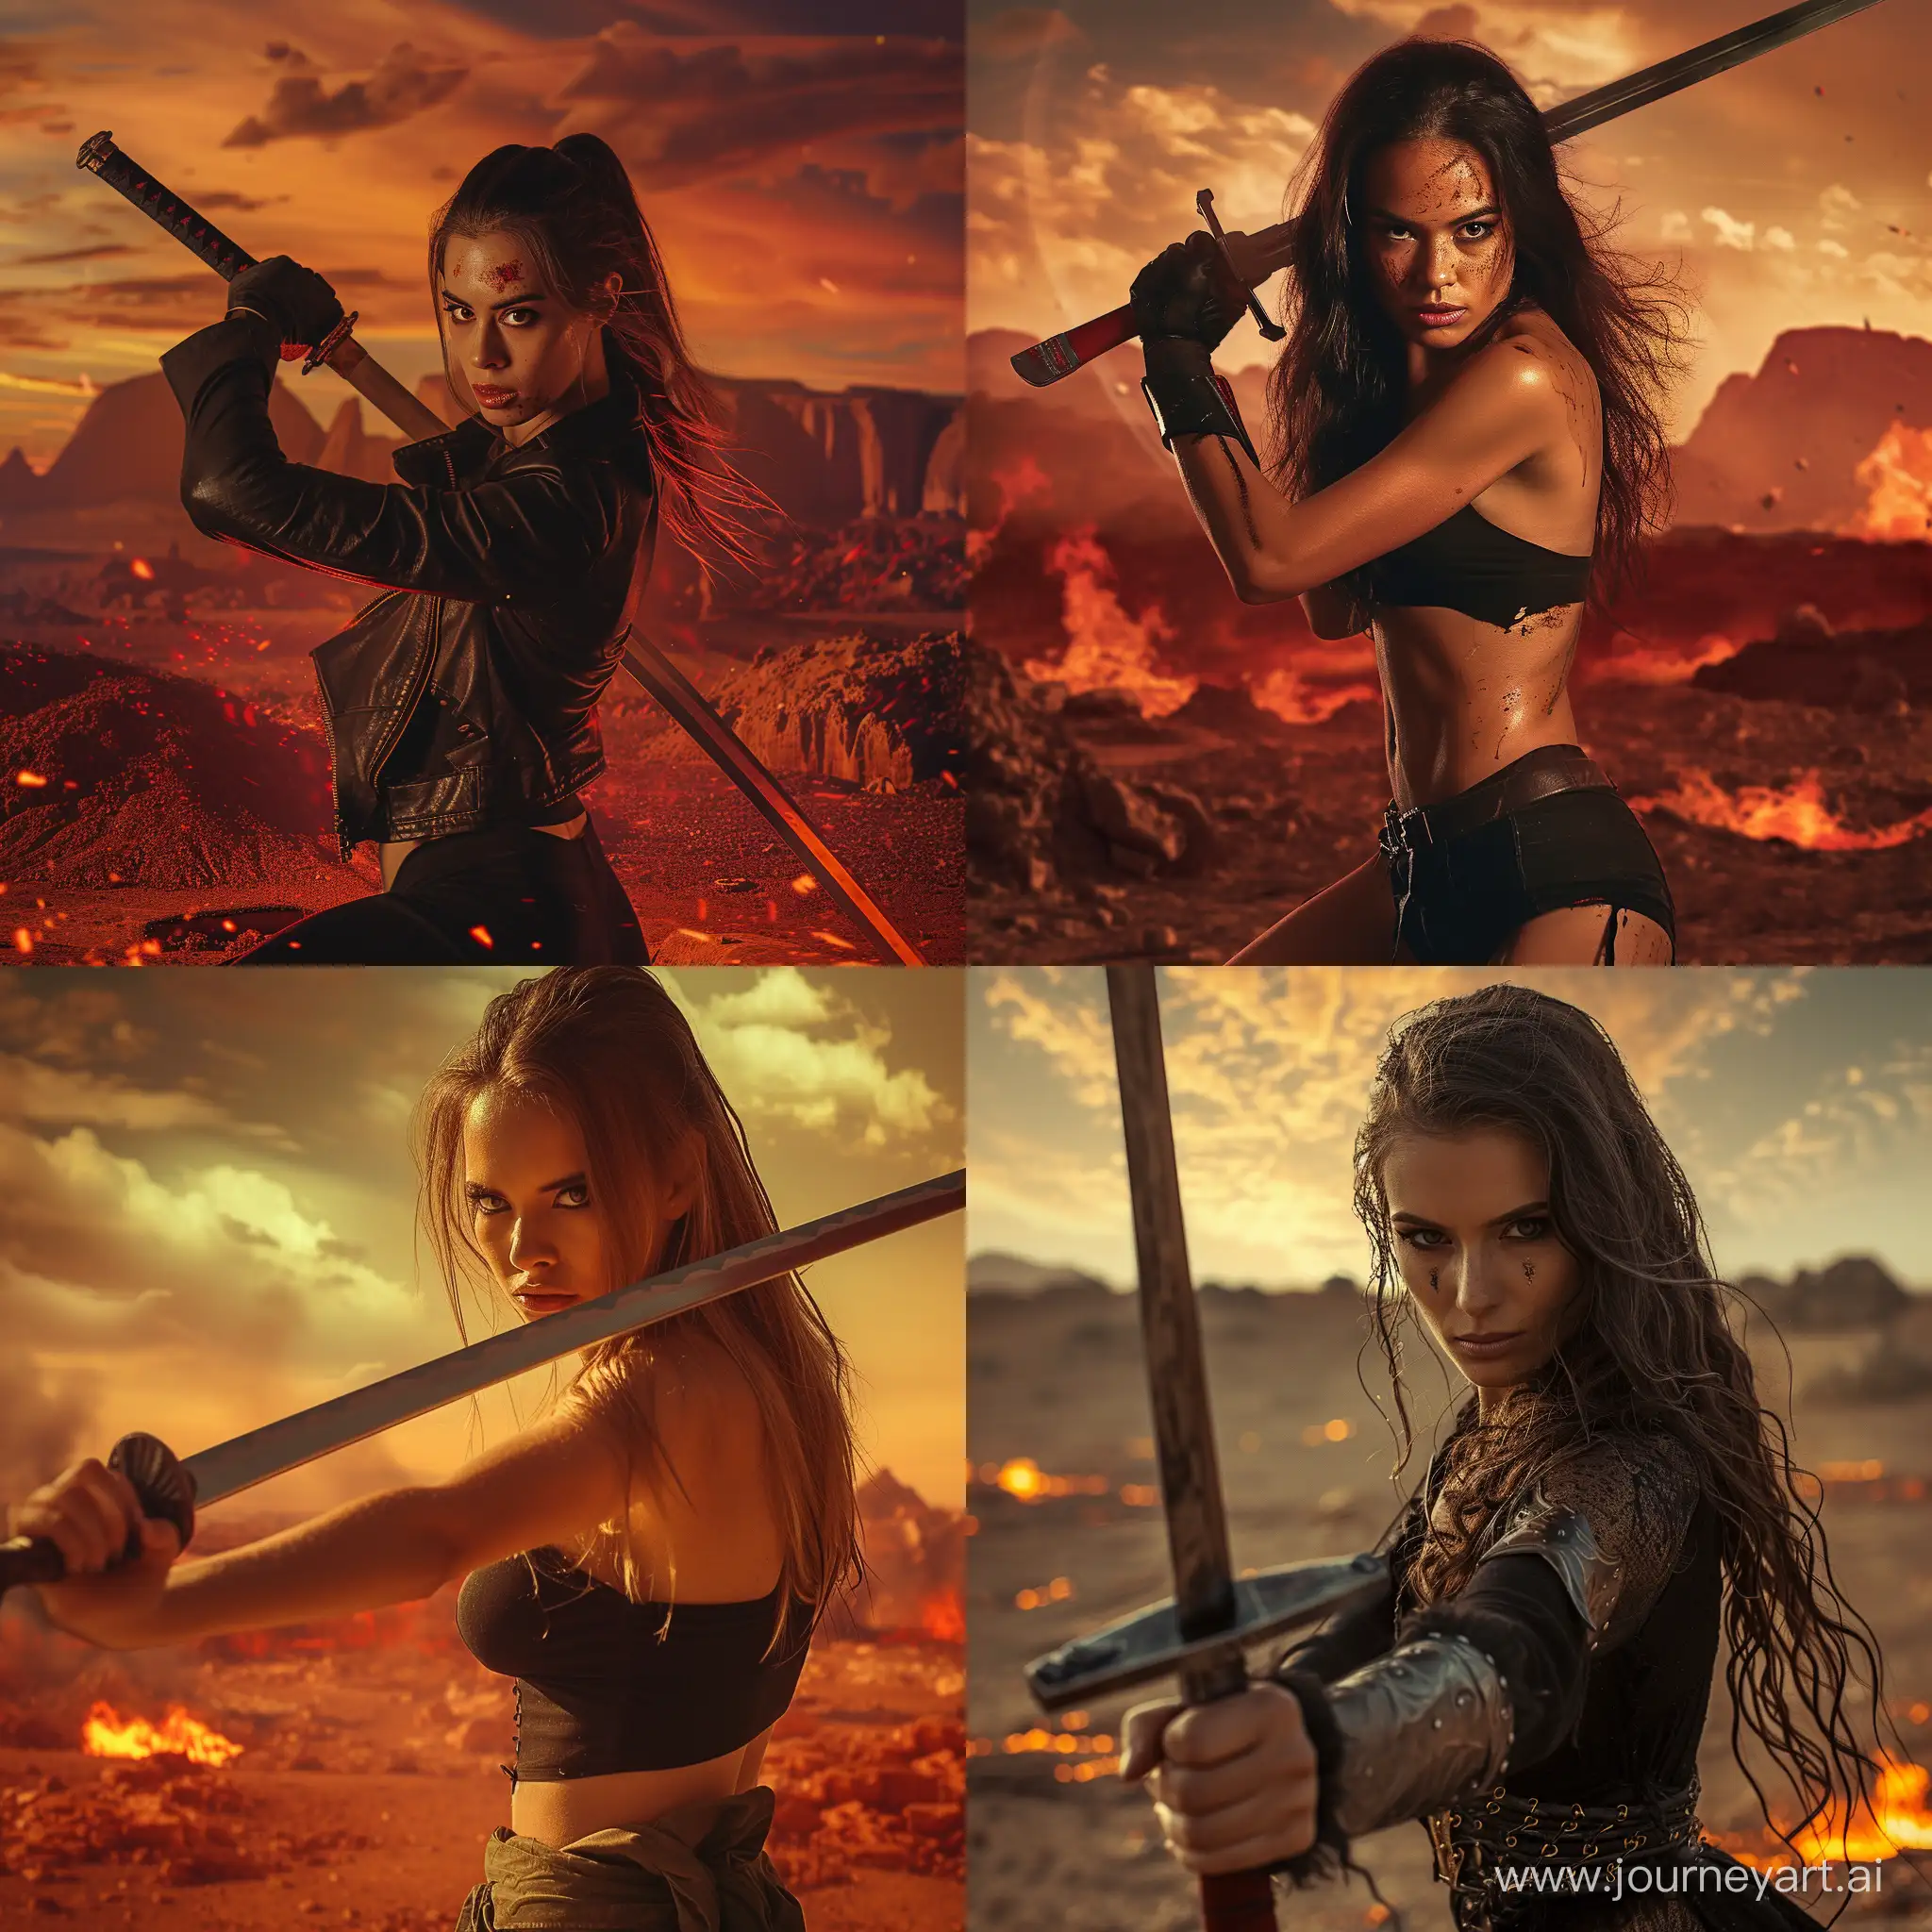 beautiful woman, holding a sword, sci-fi landscape, scorched earth, apocalyptic, ready to fight